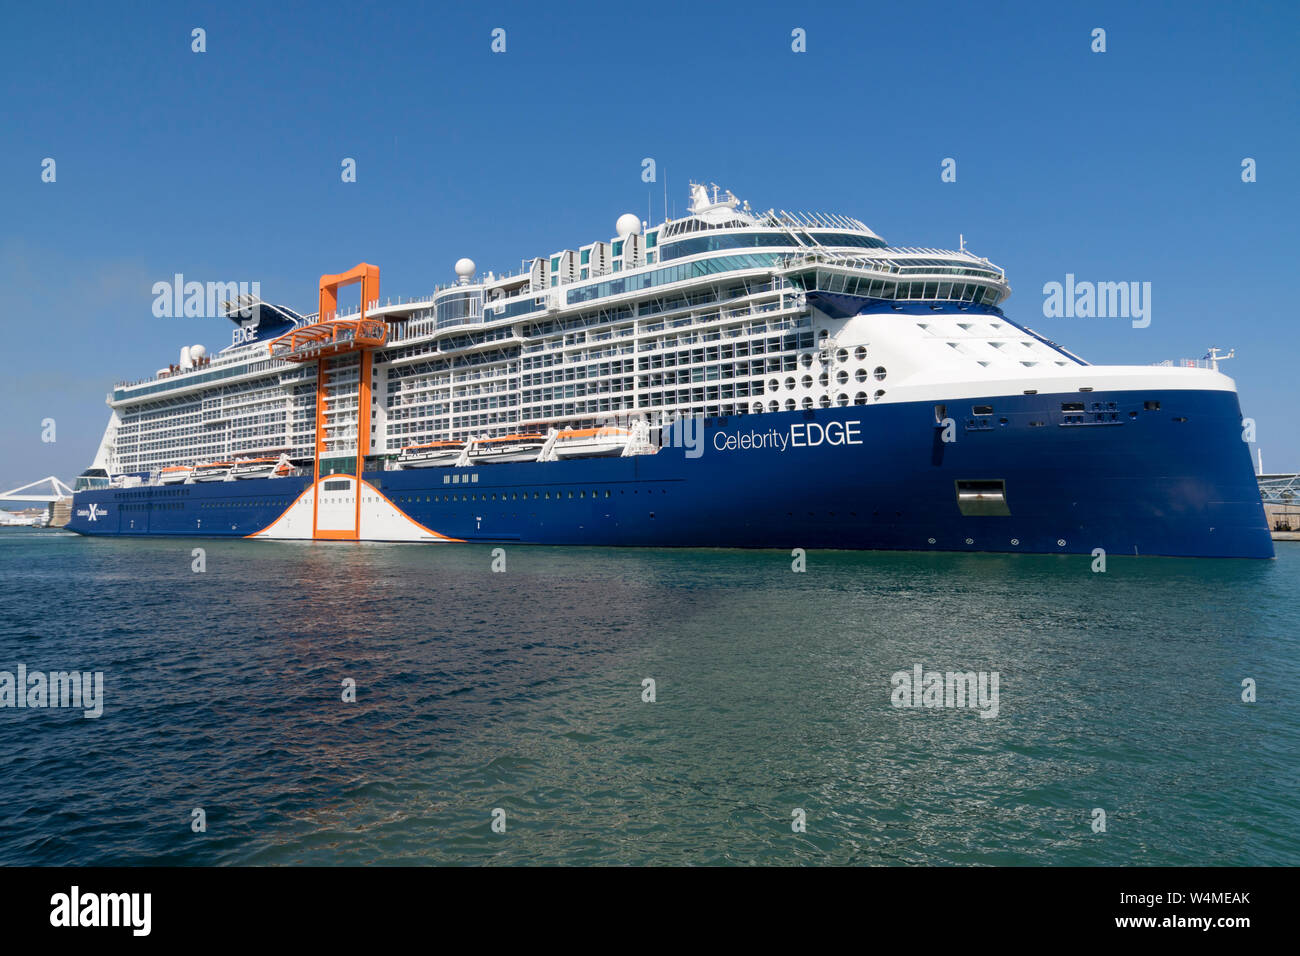 Departure of the Celebrity Edge cruise from the port of Barcelona. Stock Photo